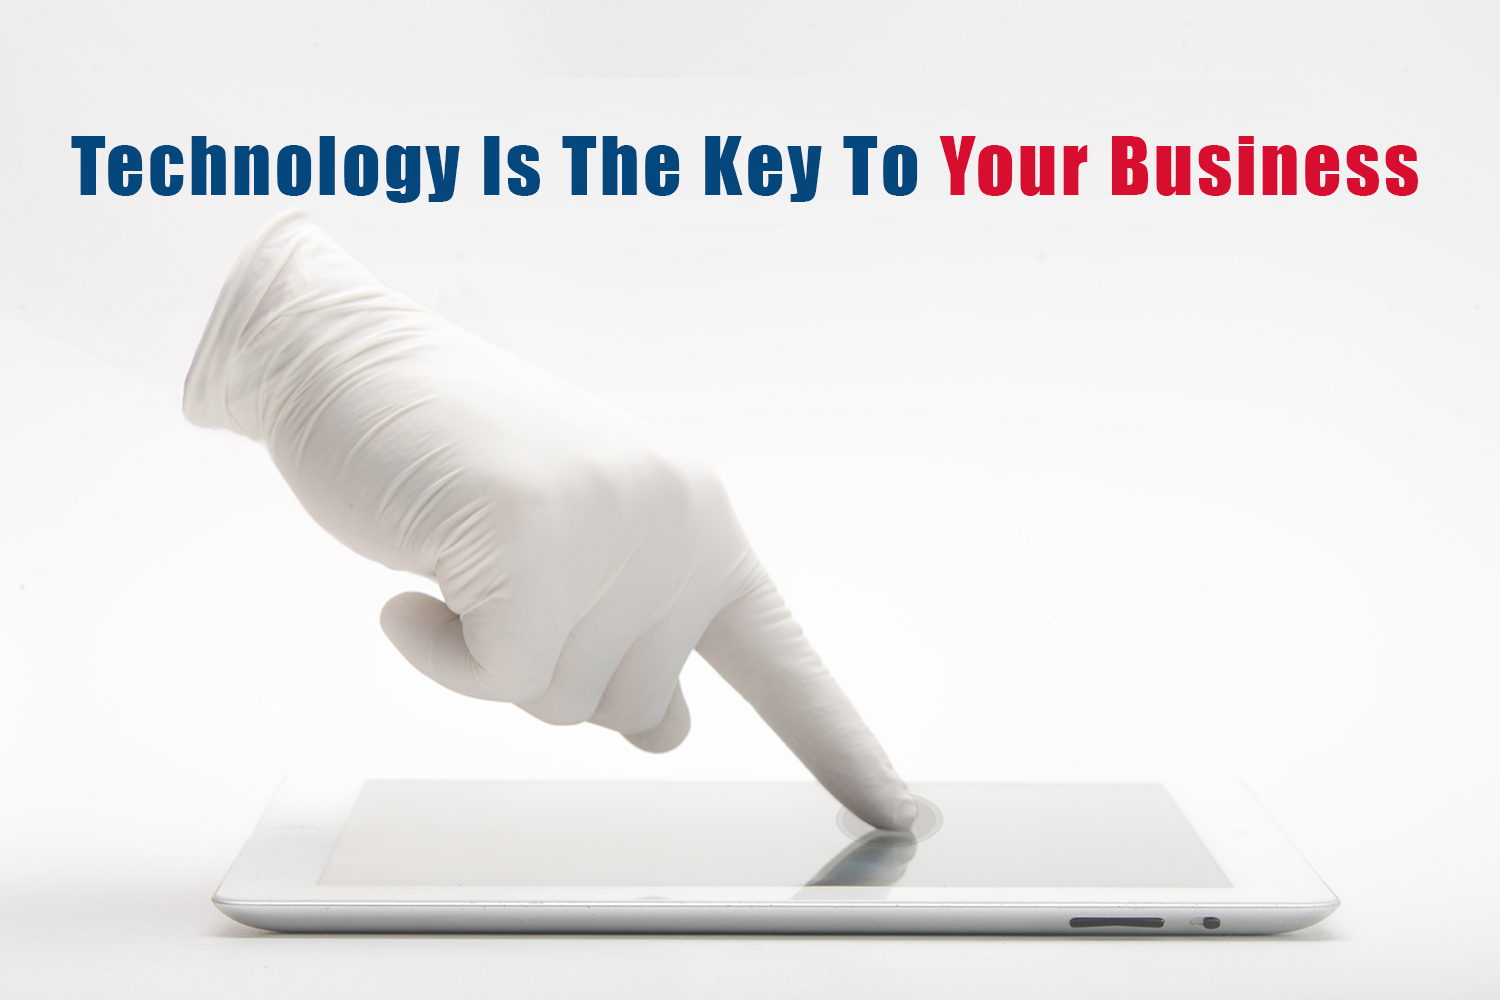 Technology Helps Your Business